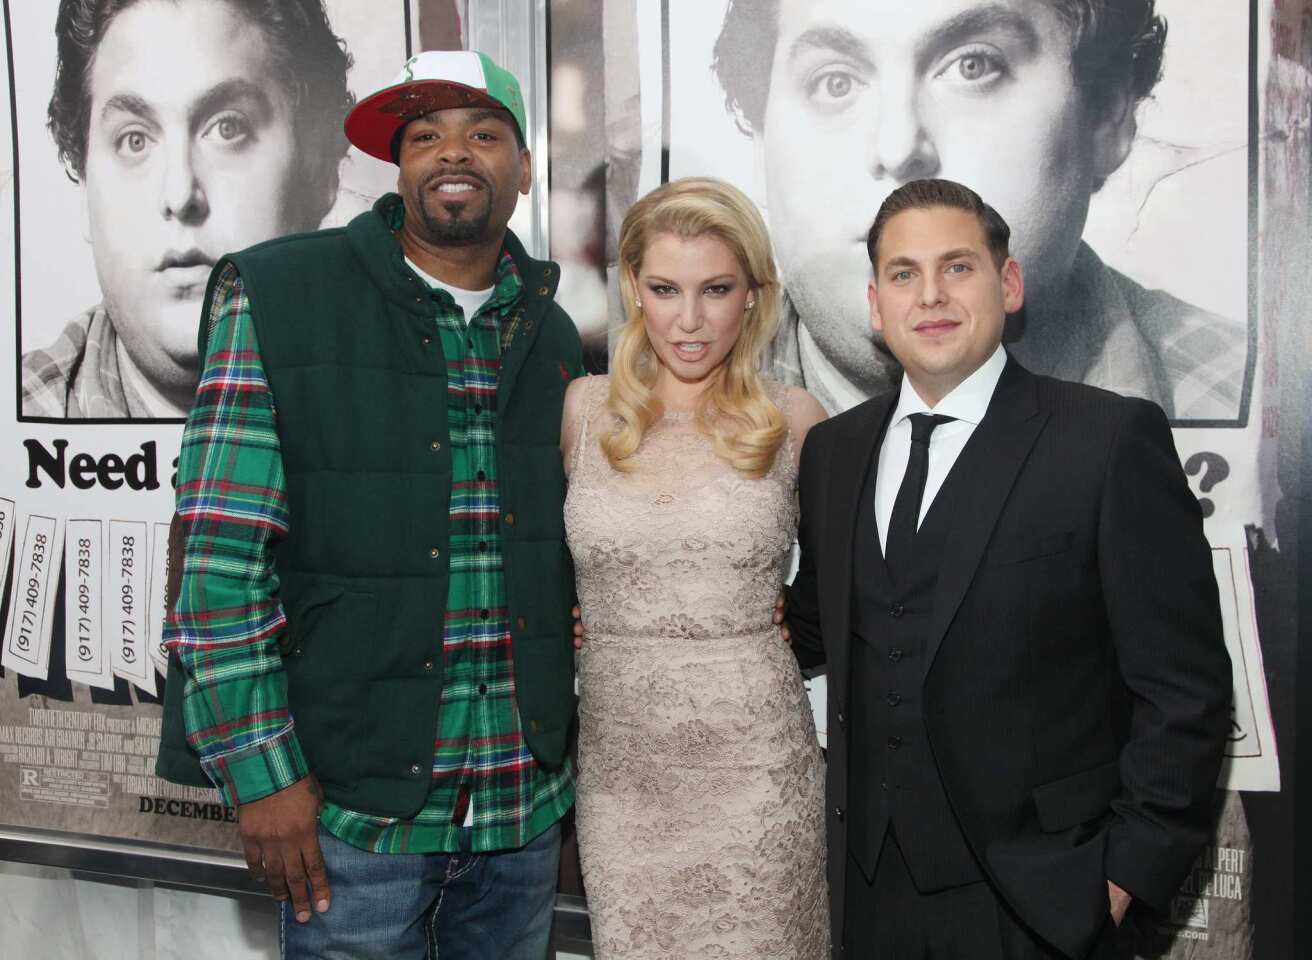 "The Sitter" follows the misadventures of Noah, played by Jonah Hill, as he attempts to baby-sit three wildly unruly children. The comedy premiered Tuesday at Chelsea Clearview Cinemas in New York City. Method Man, left, Ari Graynor and Hill star in the film.